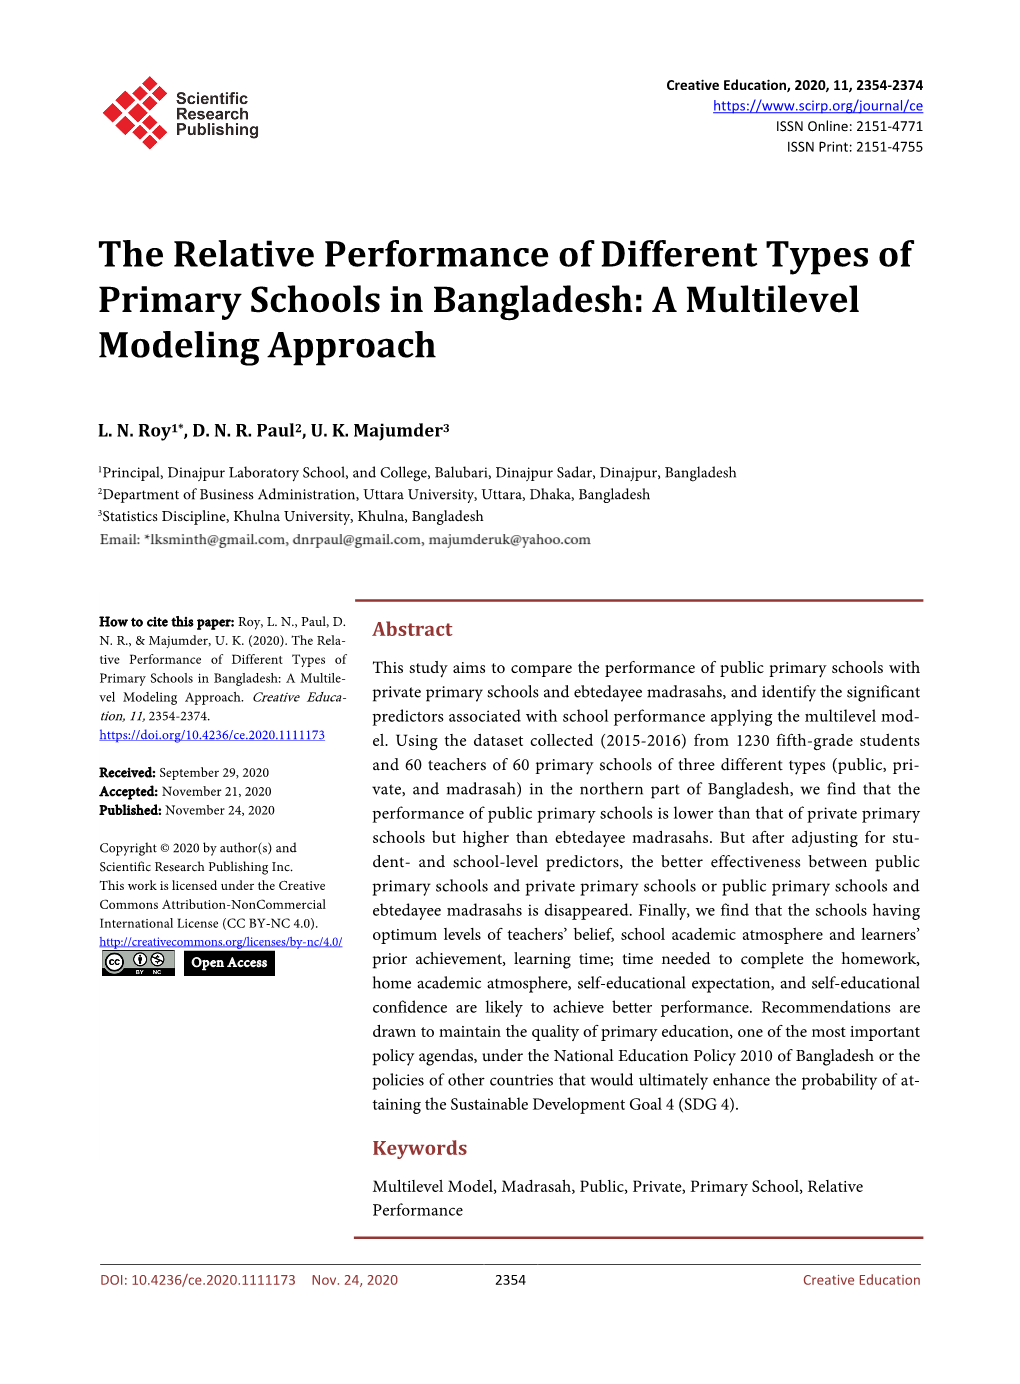 The Relative Performance of Different Types of Primary Schools in Bangladesh: a Multilevel Modeling Approach